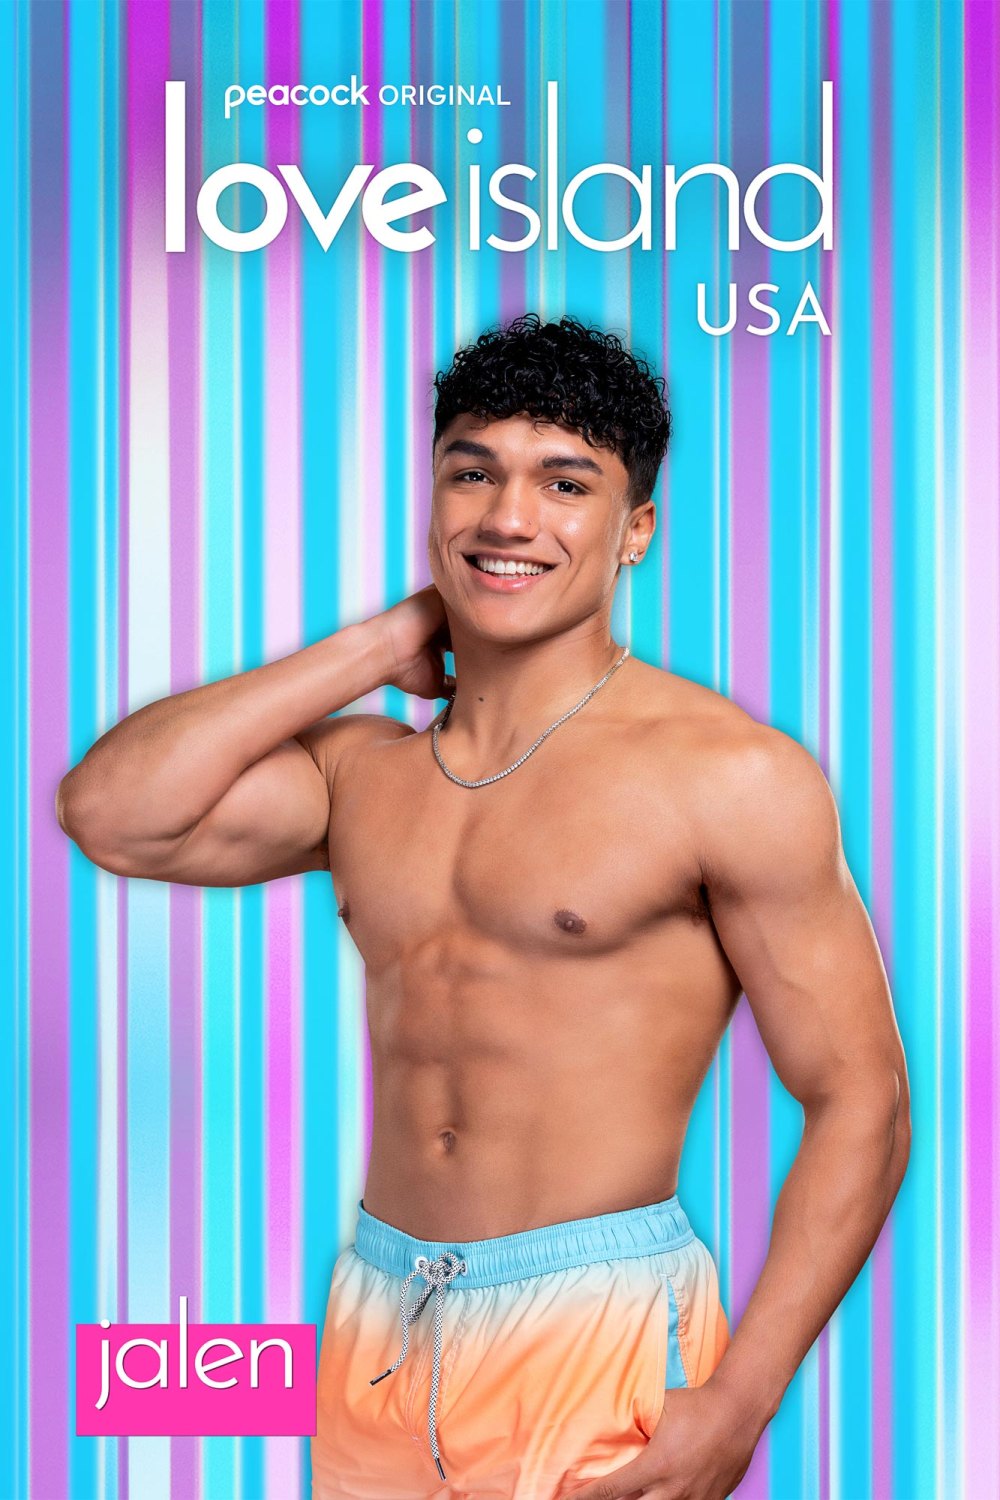 Discover the New Bombshells on Love Island USA Season 6 Coming to Casa Amor LoveIsland_S6_JALEN_CharacterPortrait_4000x6000_Text 129